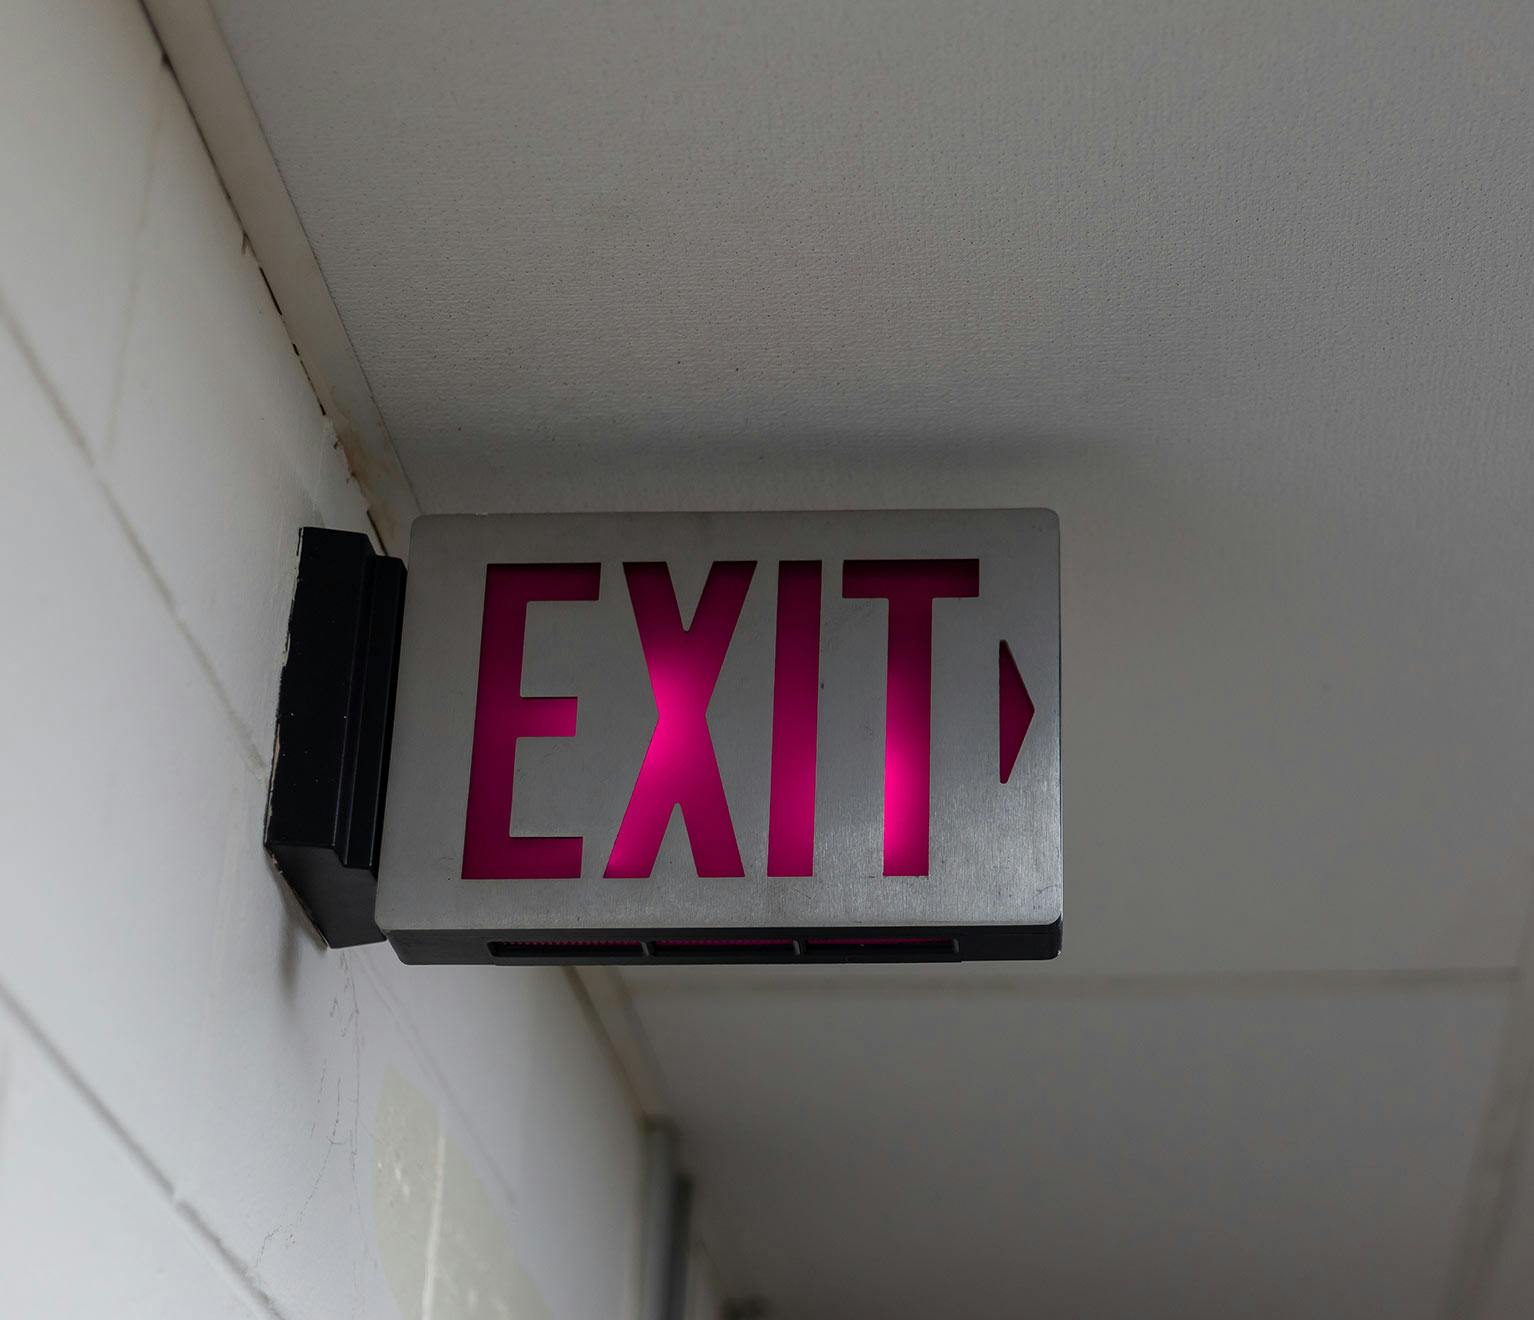 Image of  an emergency exit sign in an apartment building's hallway.